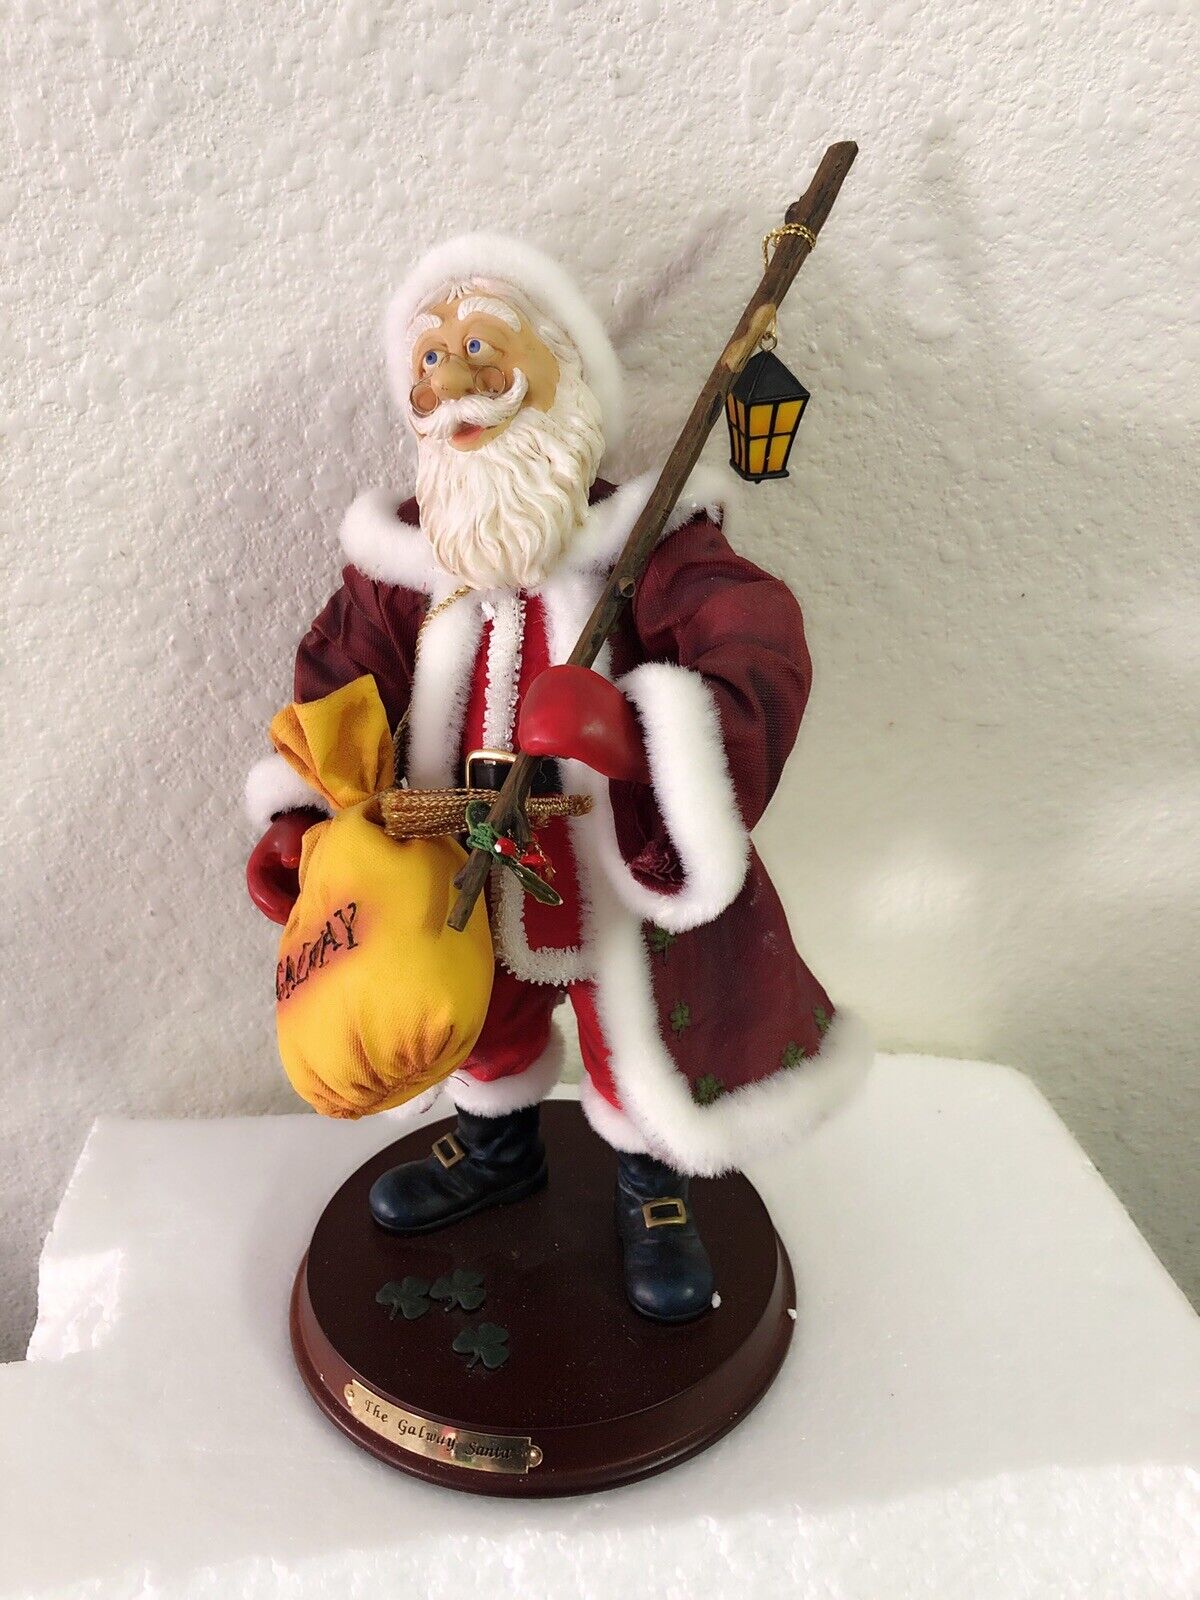 GALWAY Santa Claus Lucky 3 Glover- Santa Claus Figurine wood stand Whit Box